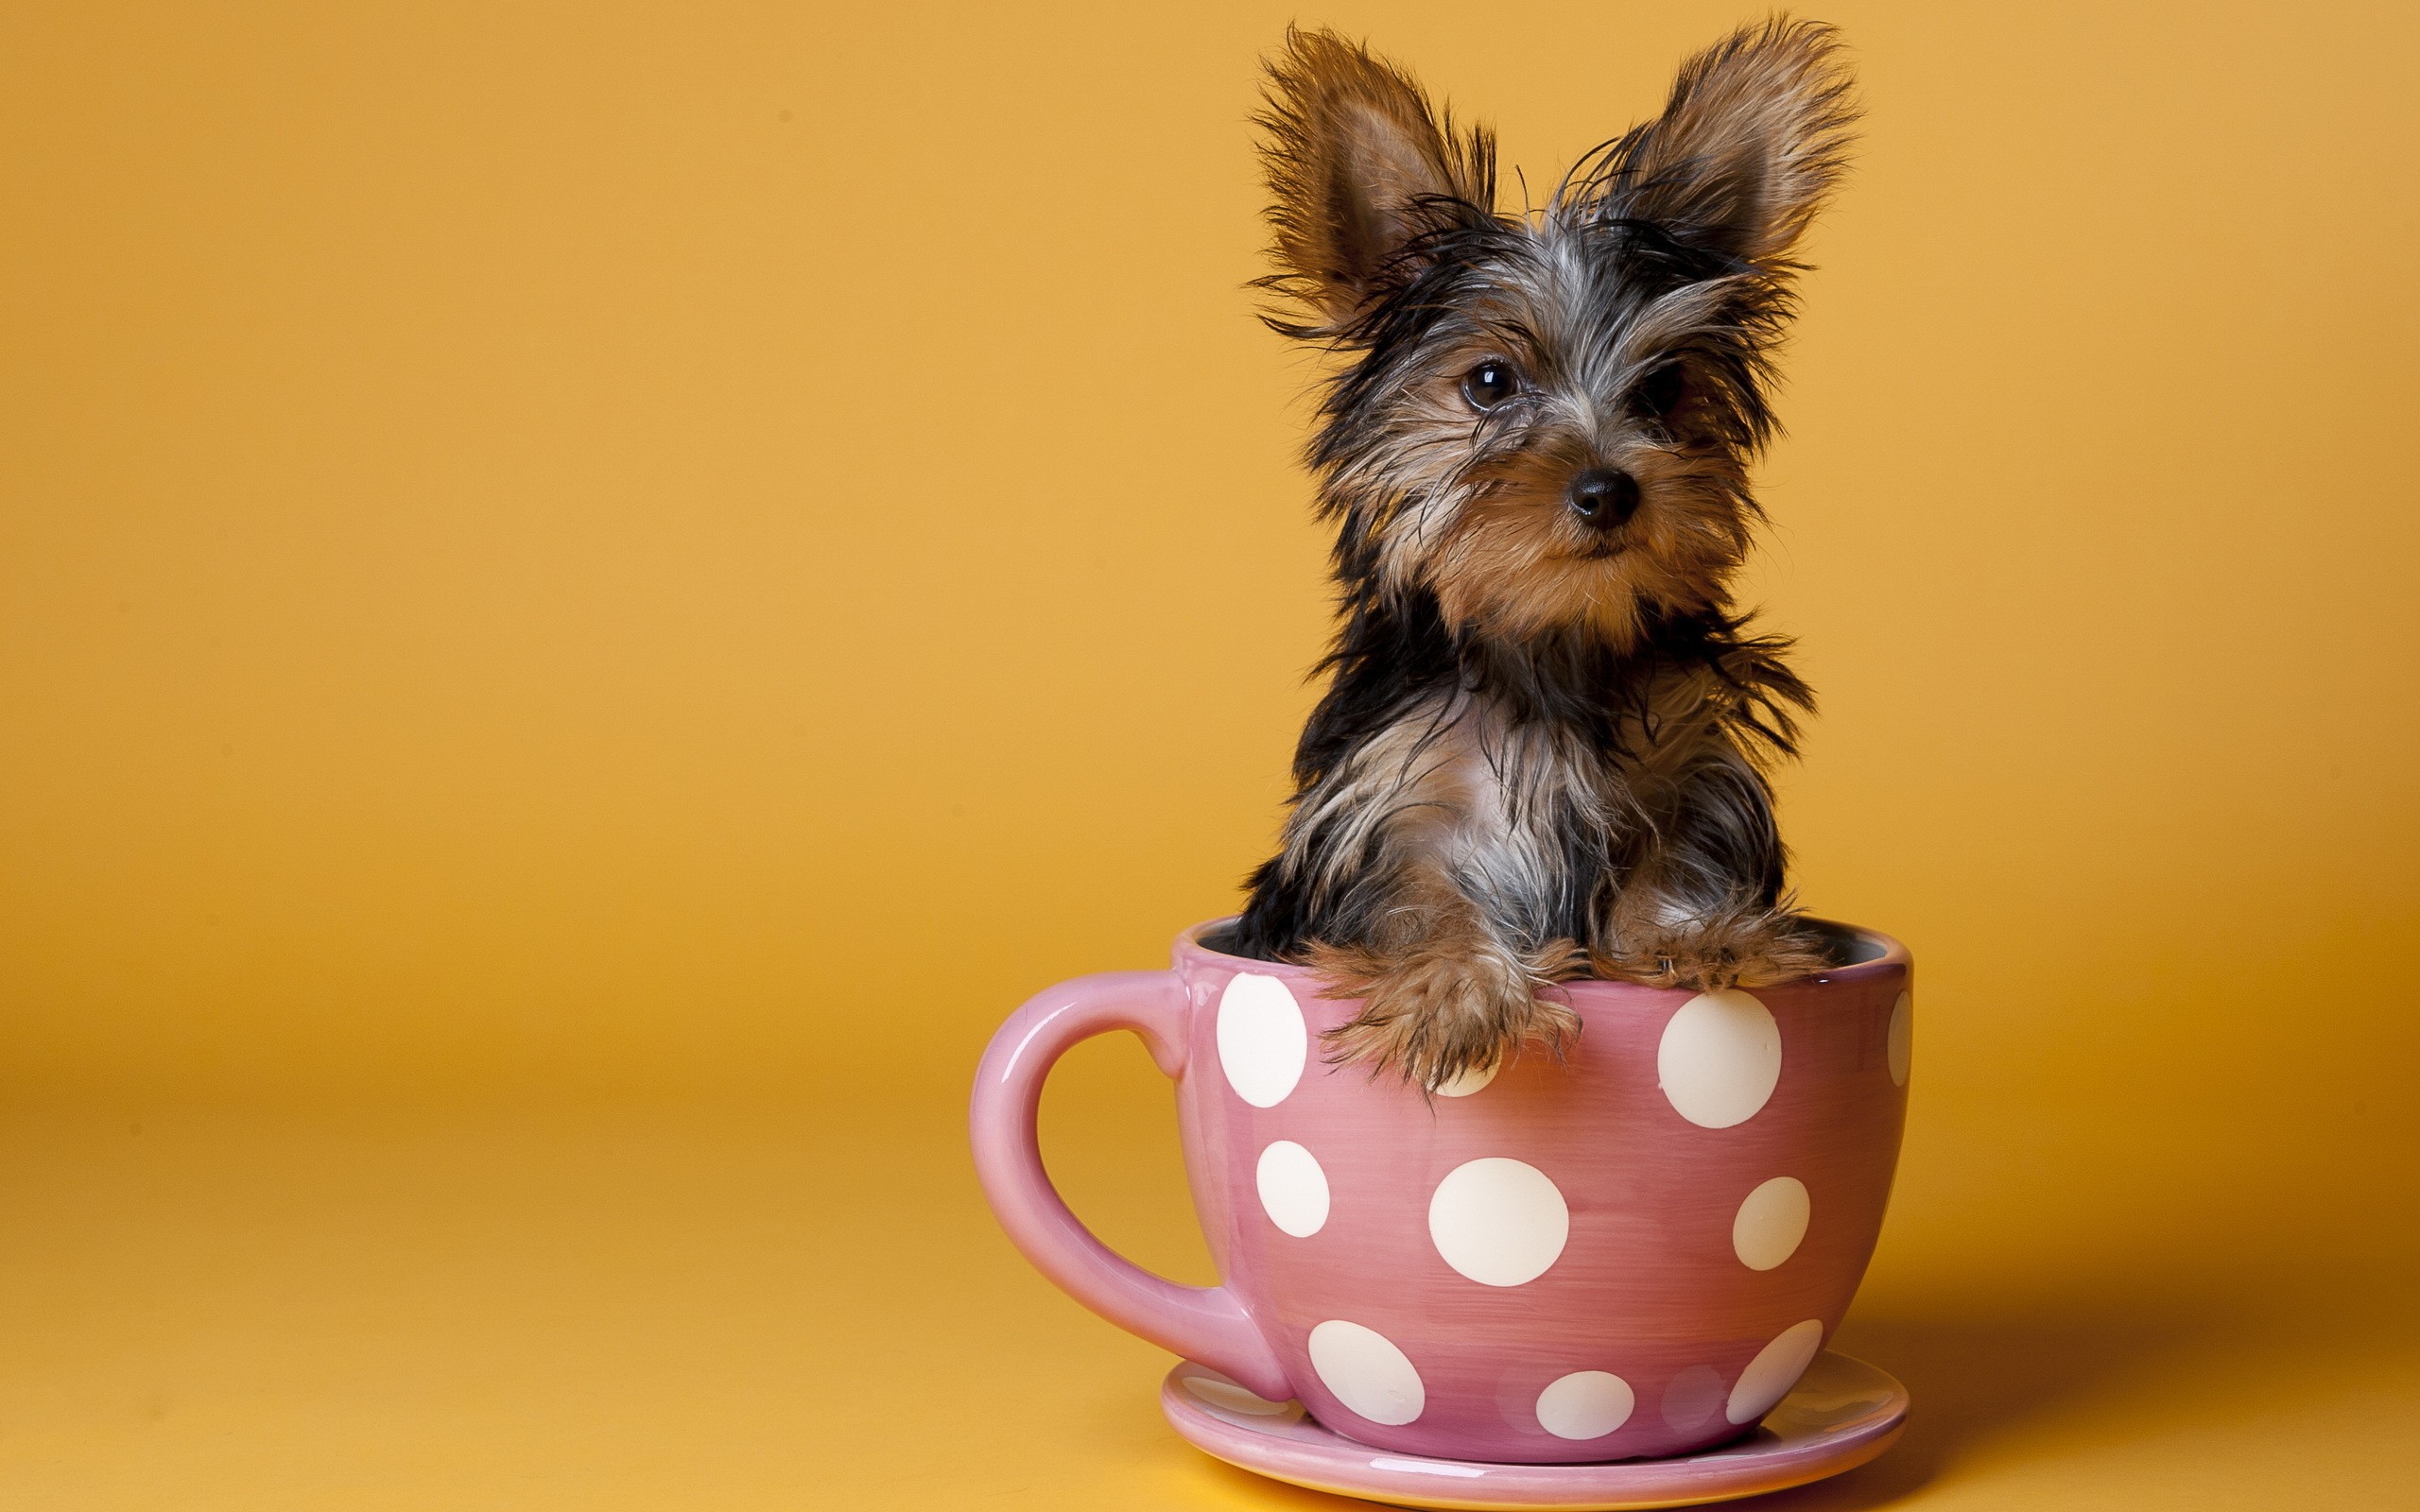 Dog in a Cup wallpapers and images - wallpapers, pictures, photos